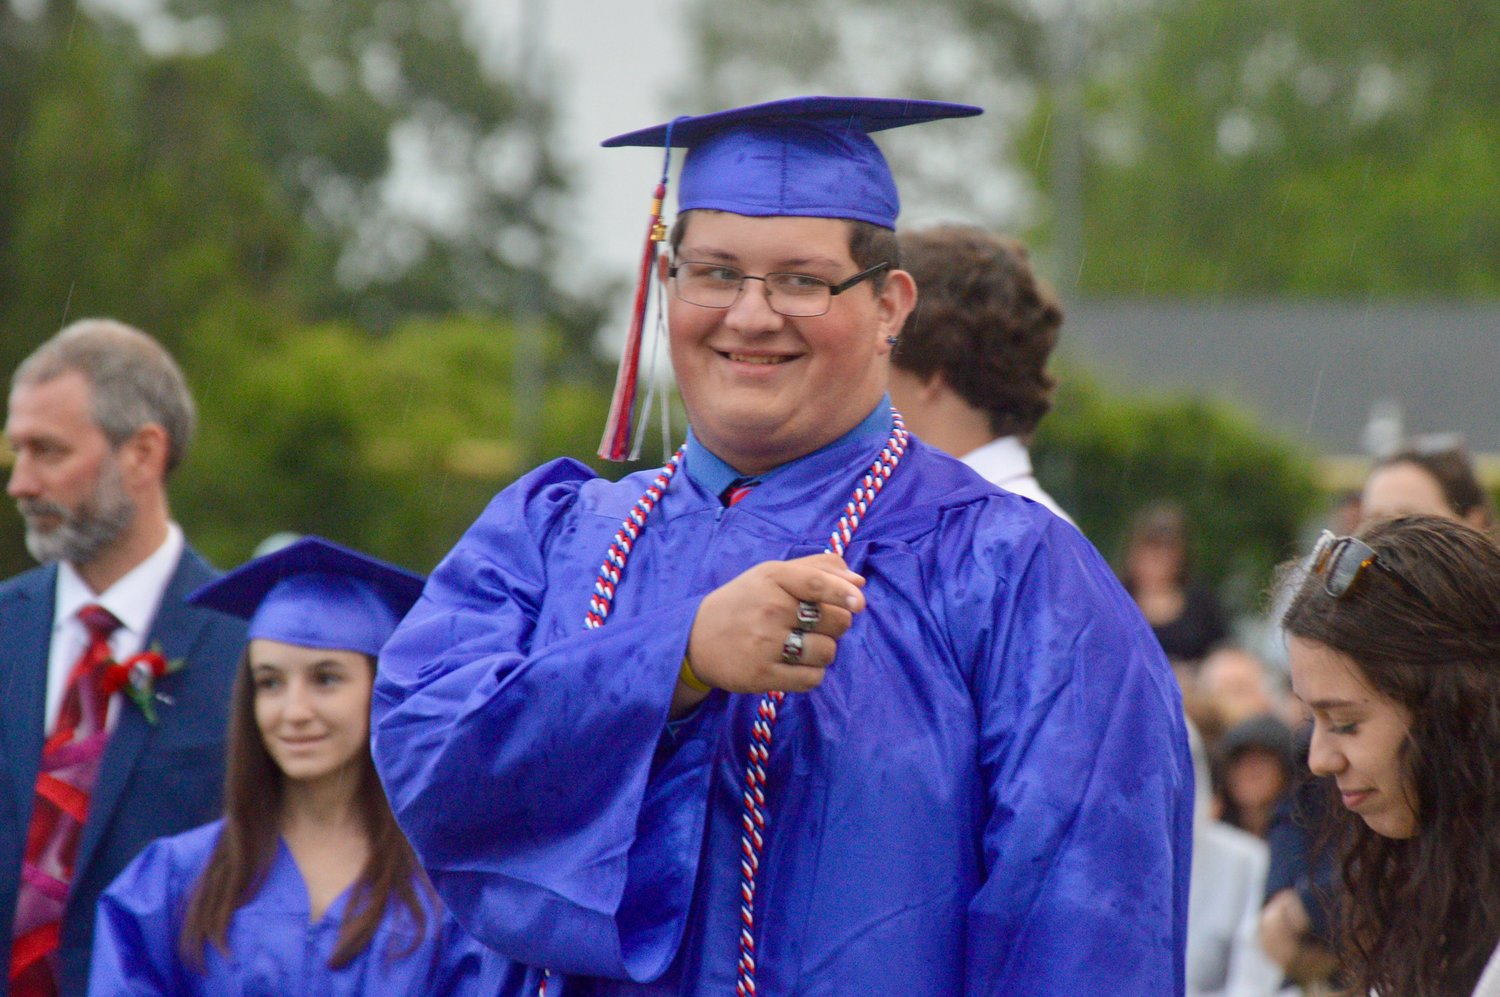 John Weiderman recognizes a friendly face before he collects his diploma.